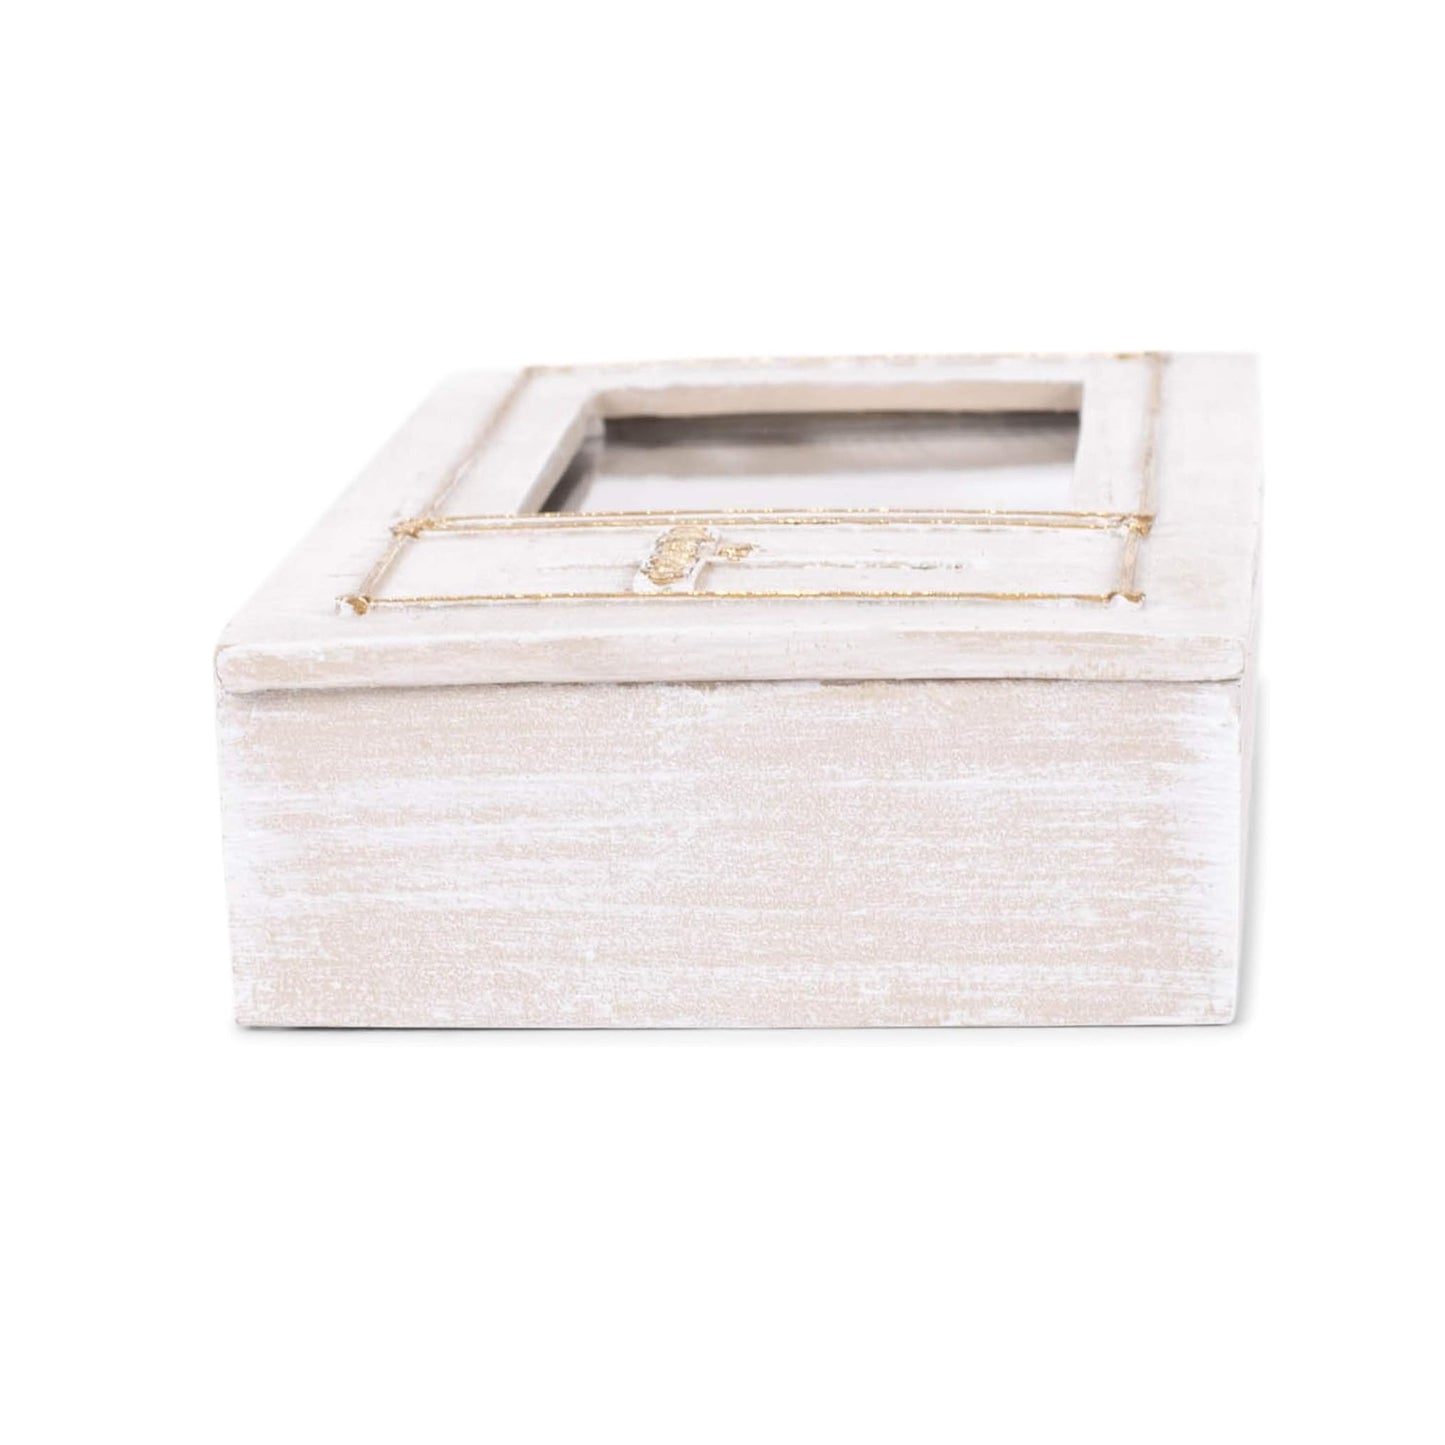 Roman Keepsake Confirmation Box with Cross and Frame 1.75" H